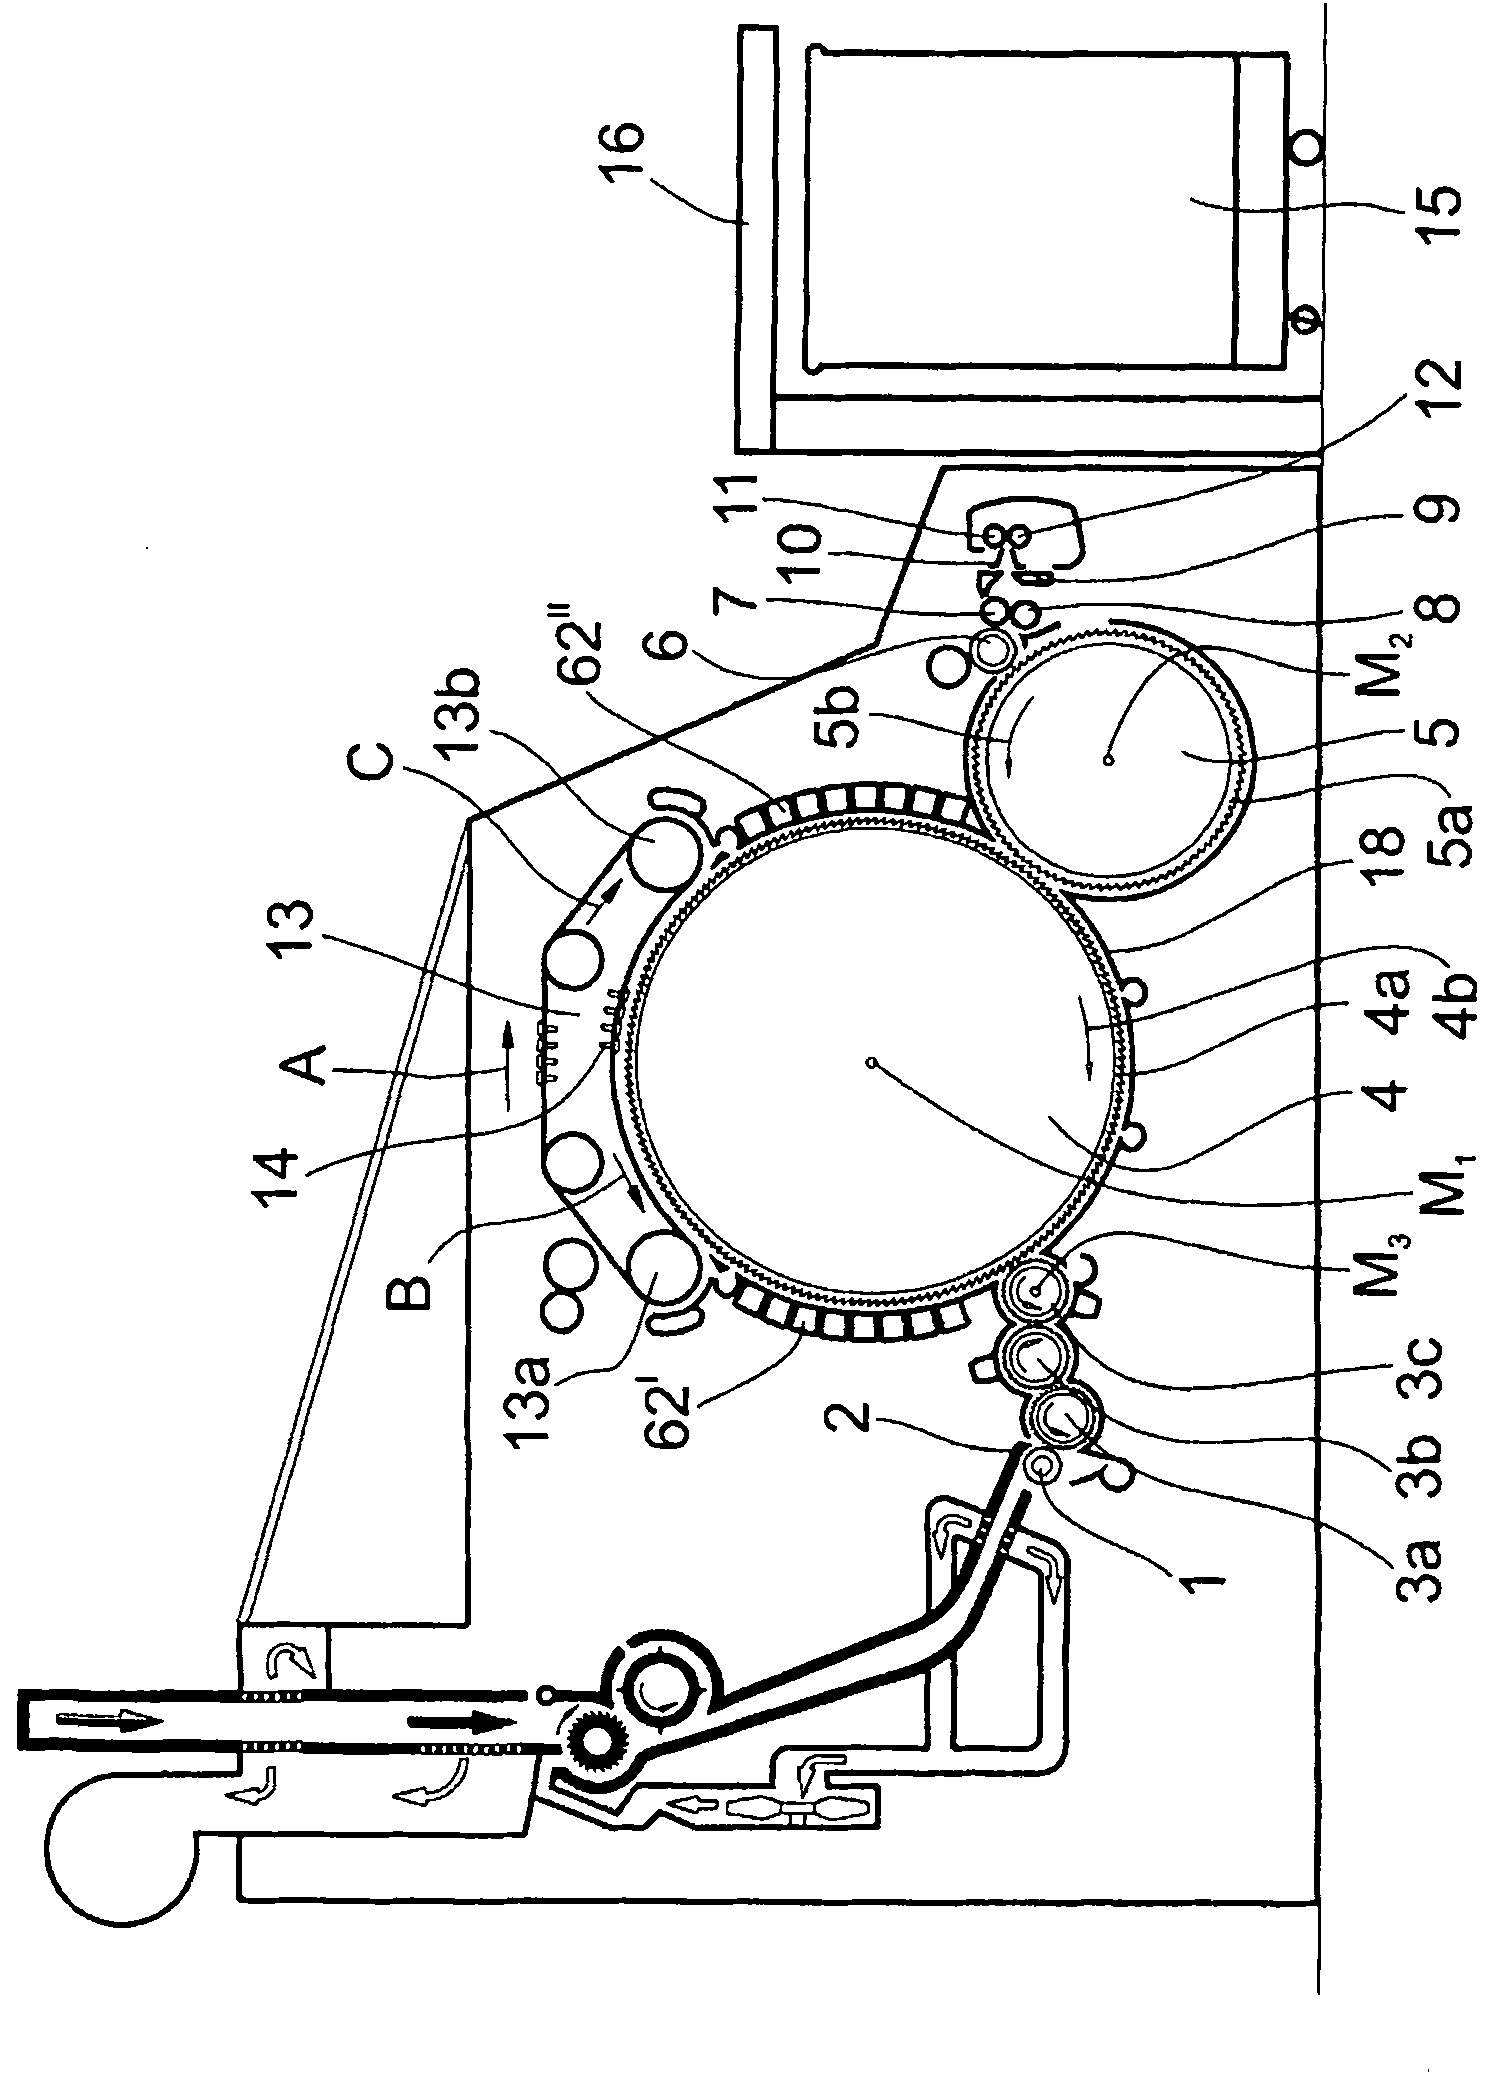 Device on carding machine having cylinders, working elements and adjustable holding elements